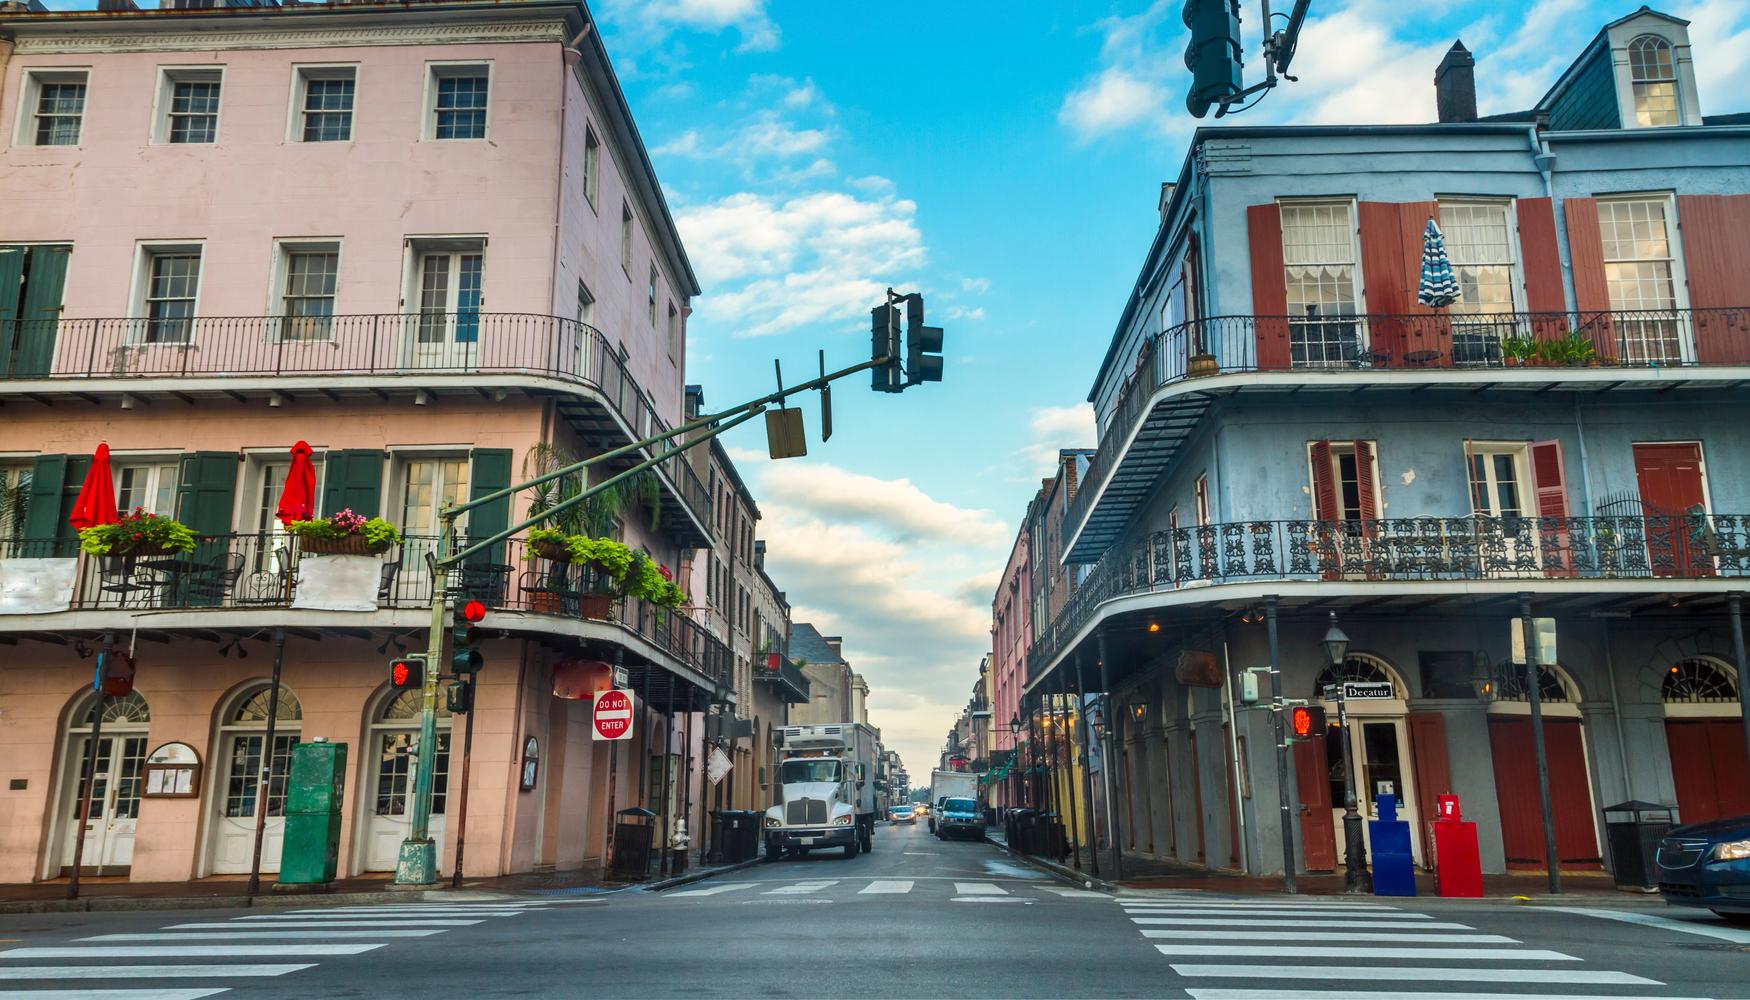 New Orleans Vacation Packages from 595 Search Flight+Hotel on KAYAK